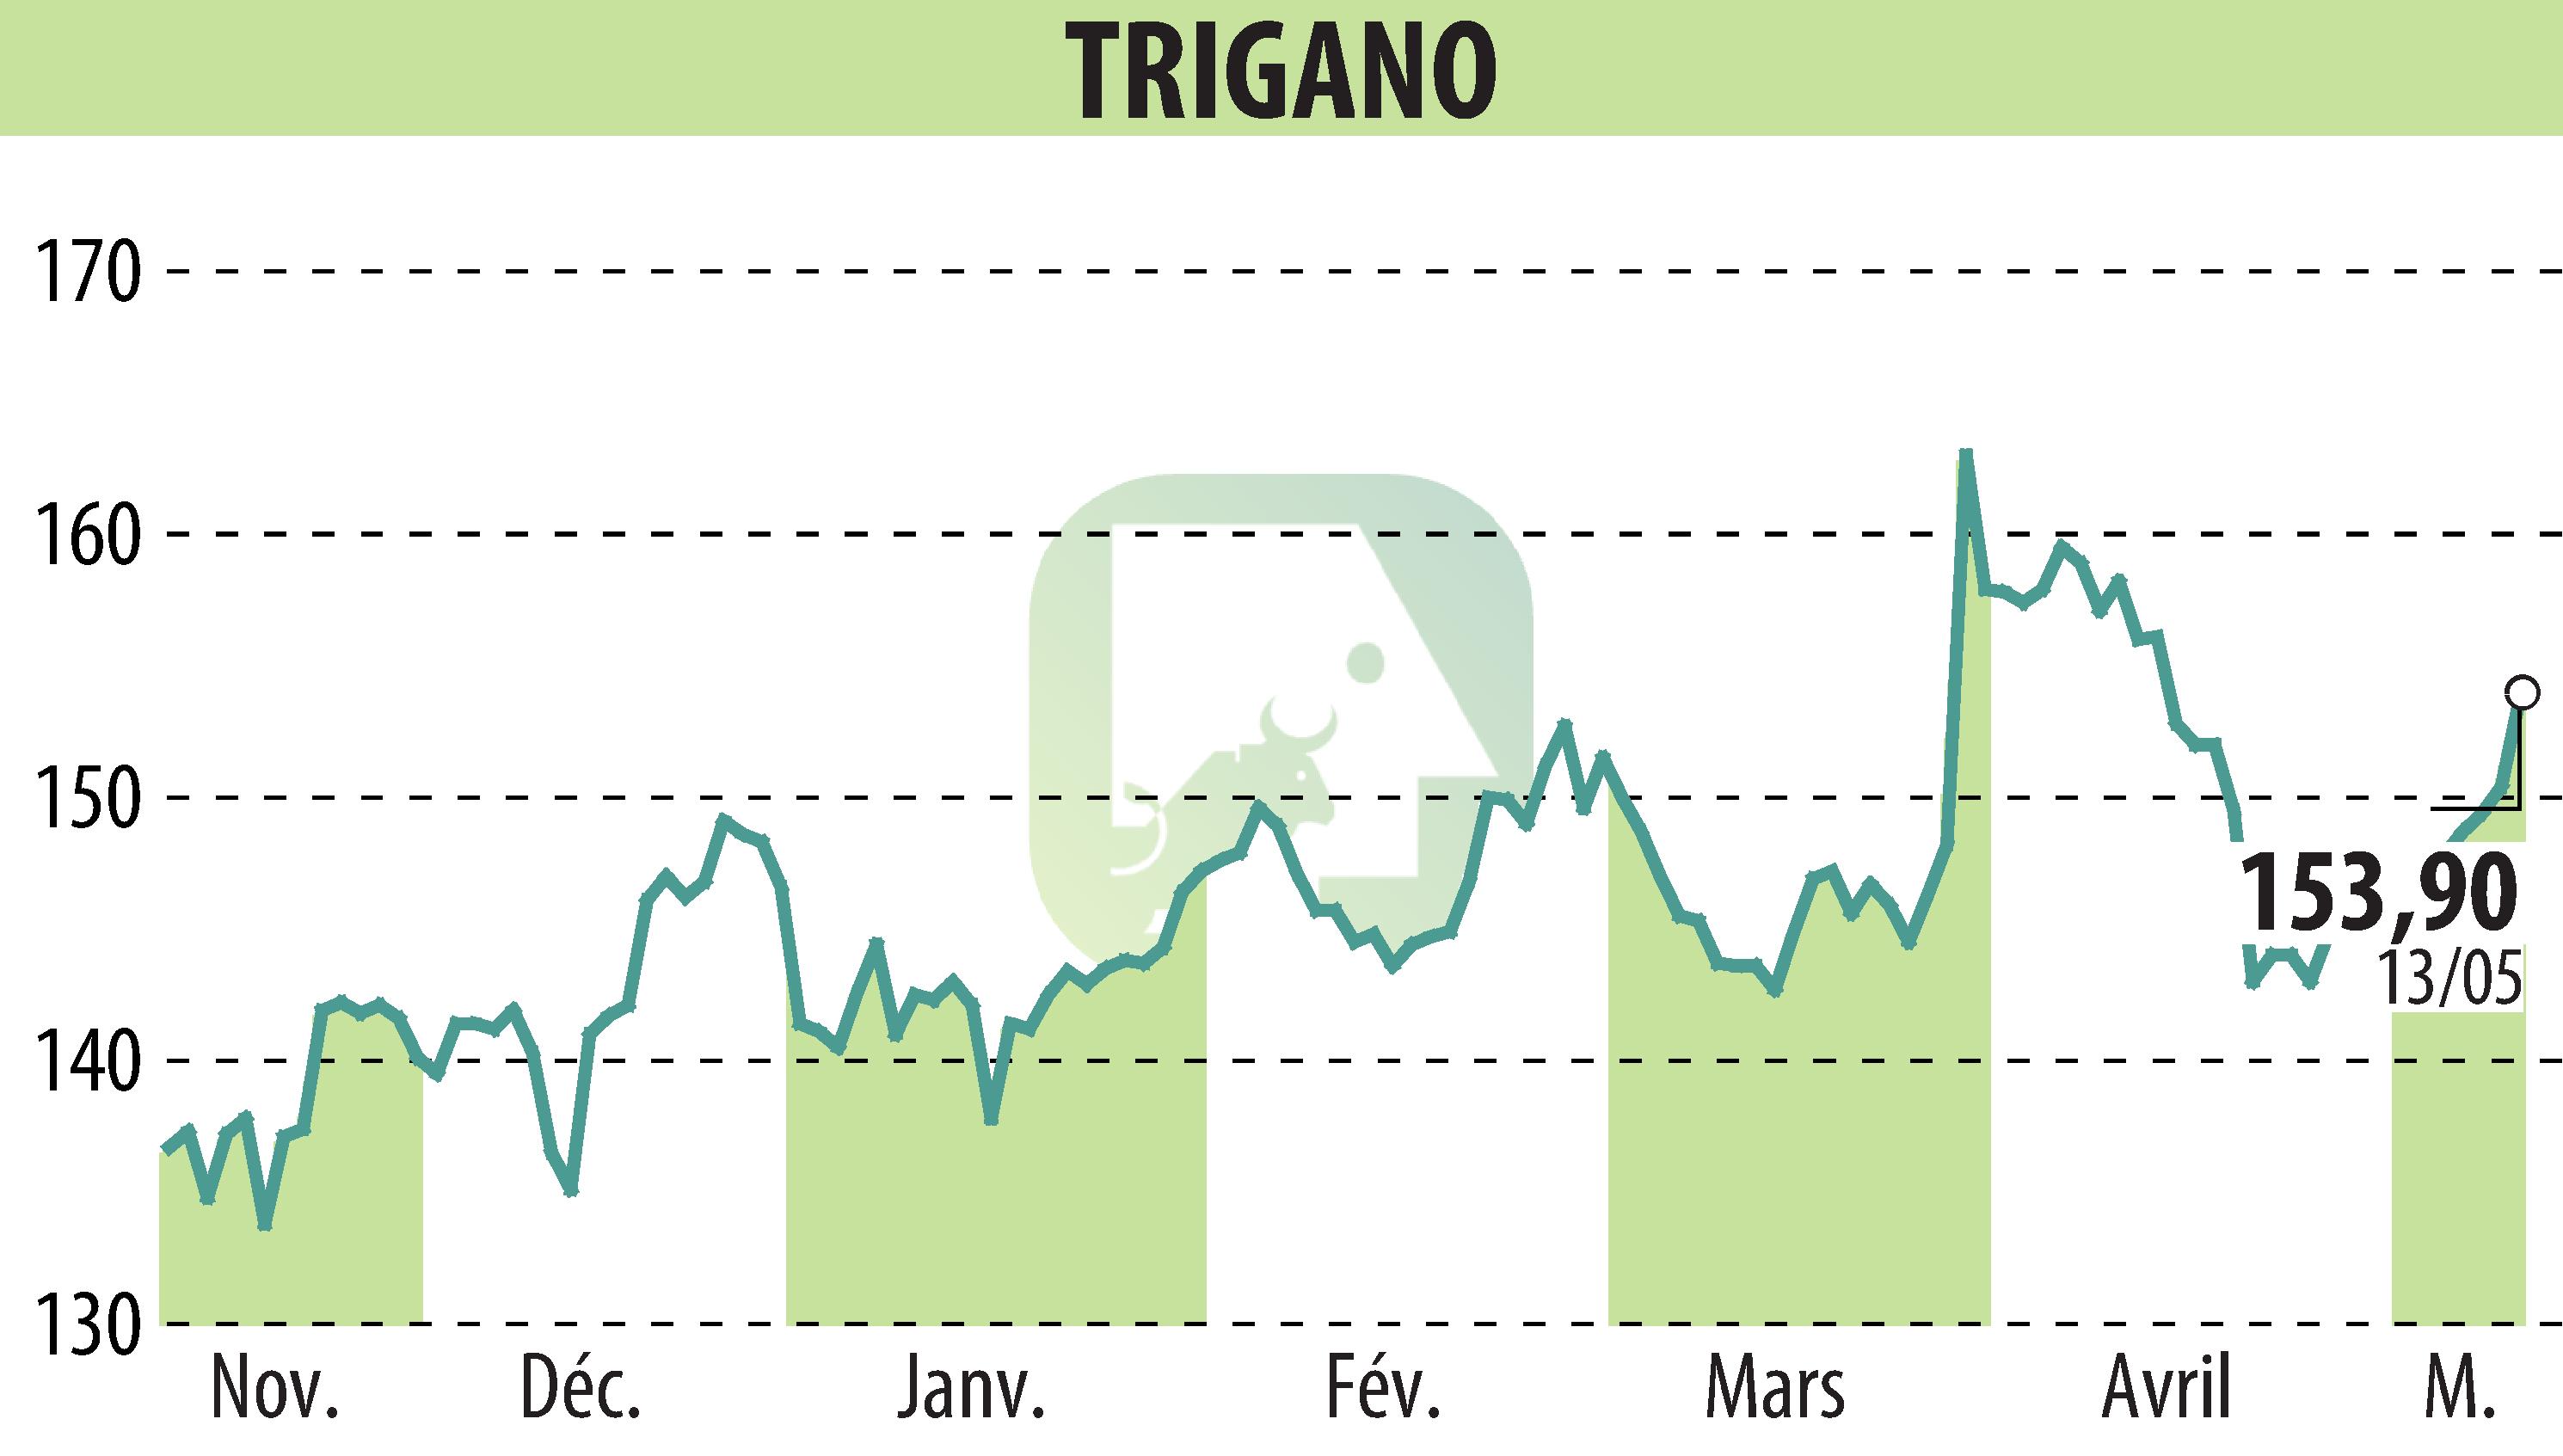 Stock price chart of TRIGANO (EPA:TRI) showing fluctuations.